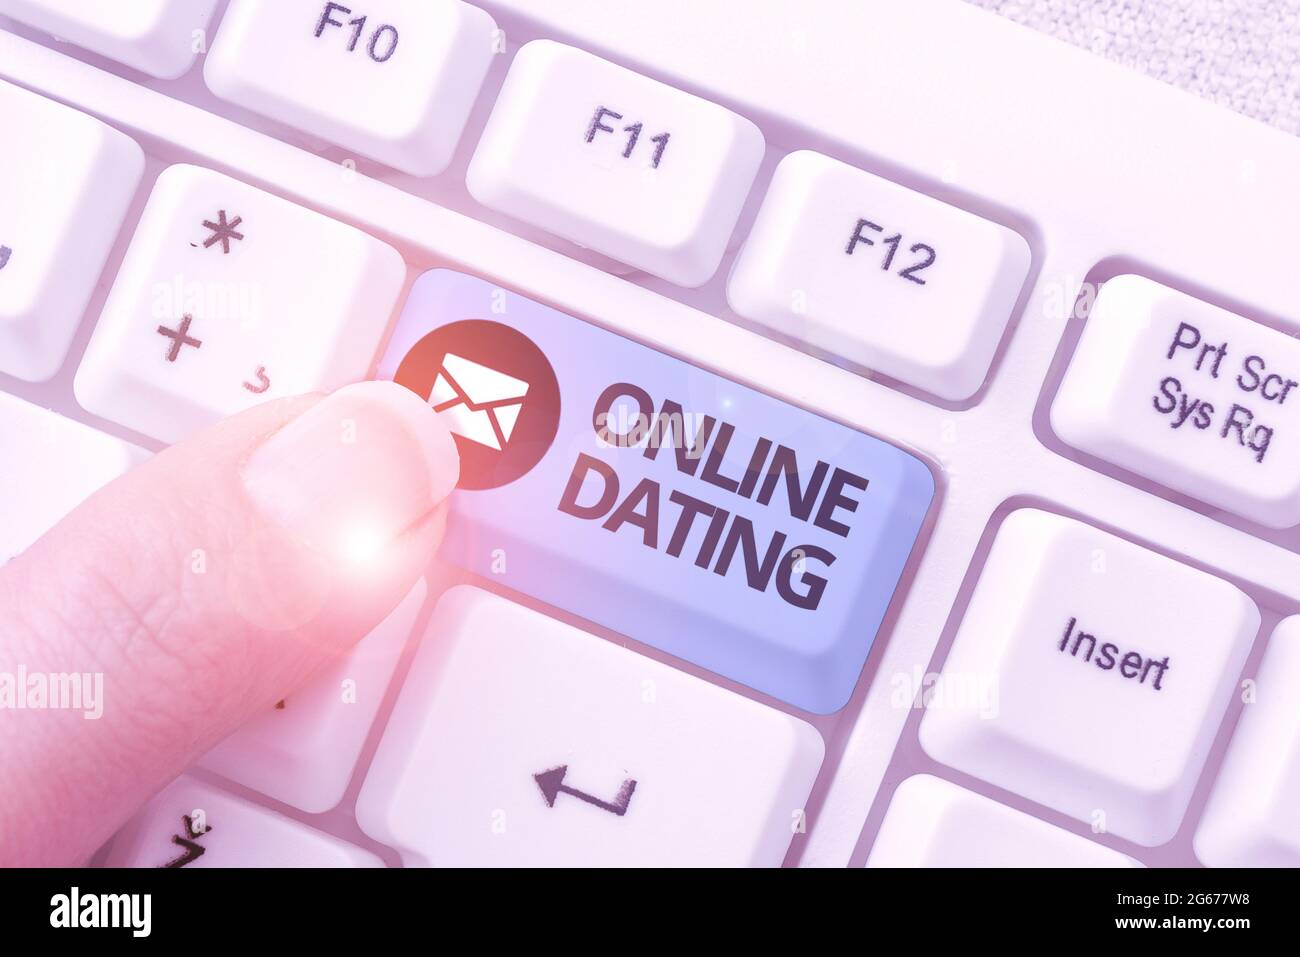 How looking at a dating app can ruin your marriage